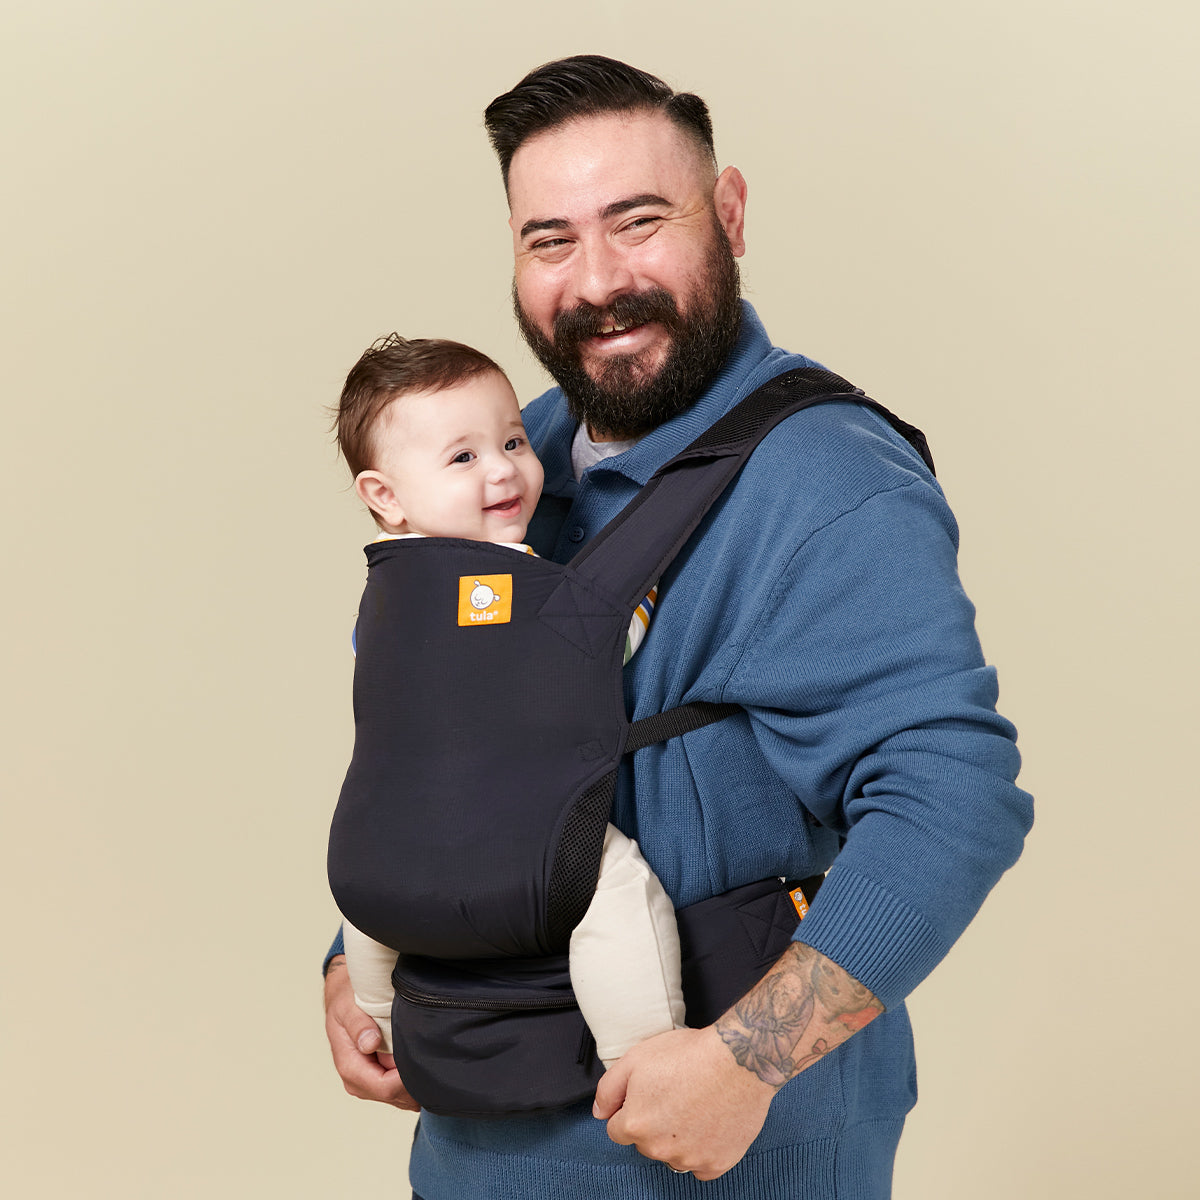 A smiling dad carrying his happy child in Tula Lite baby carrier Black